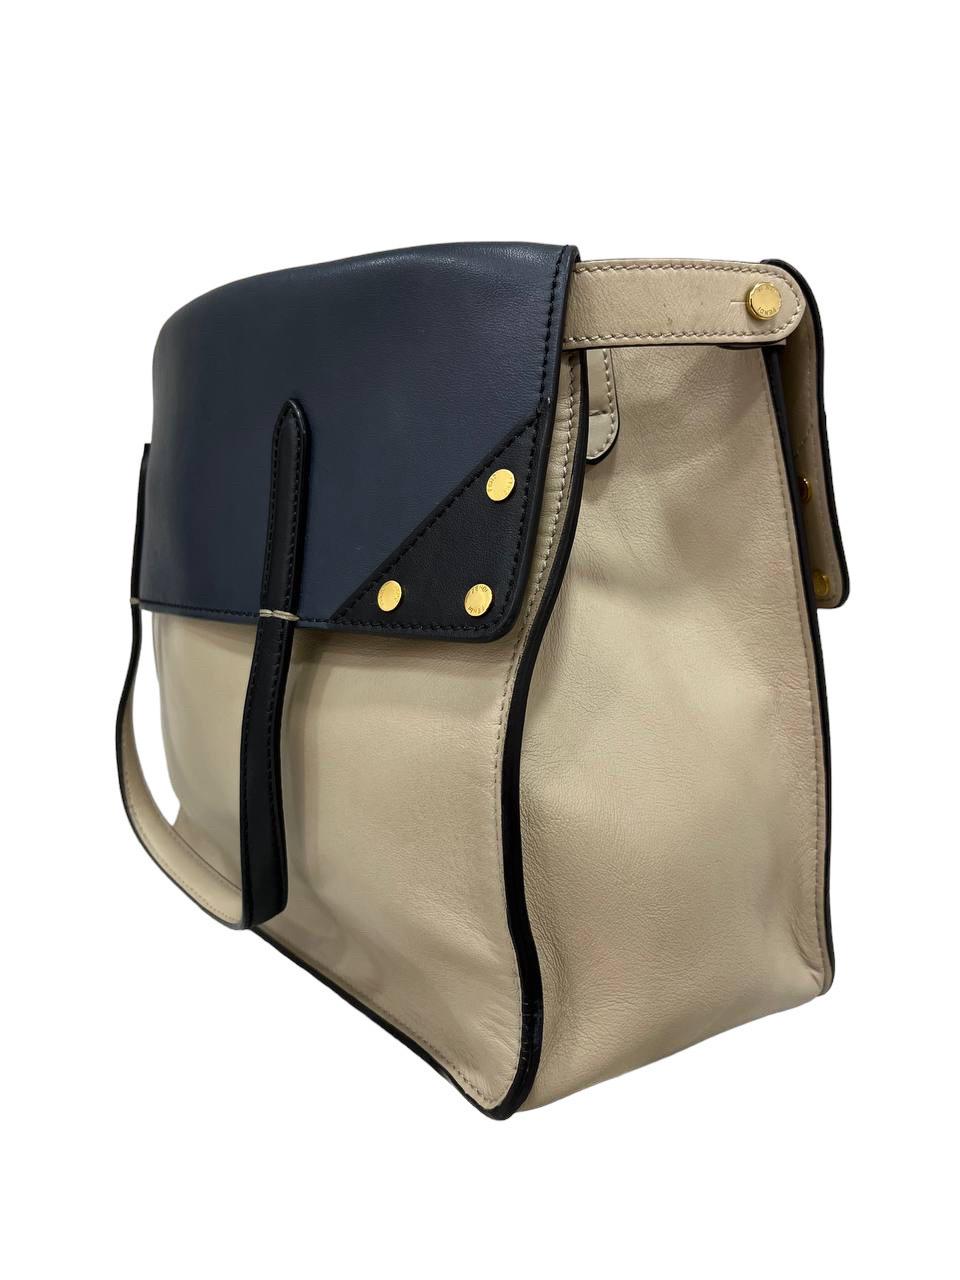 Bag signed Fendi, Flip model, made of beige bicolor leather with blue finishes and gold hardware. Internally lined in suede, quite roomy, it has two flat pockets, one of which has a button closure. It is equipped with two upper handles for carrying